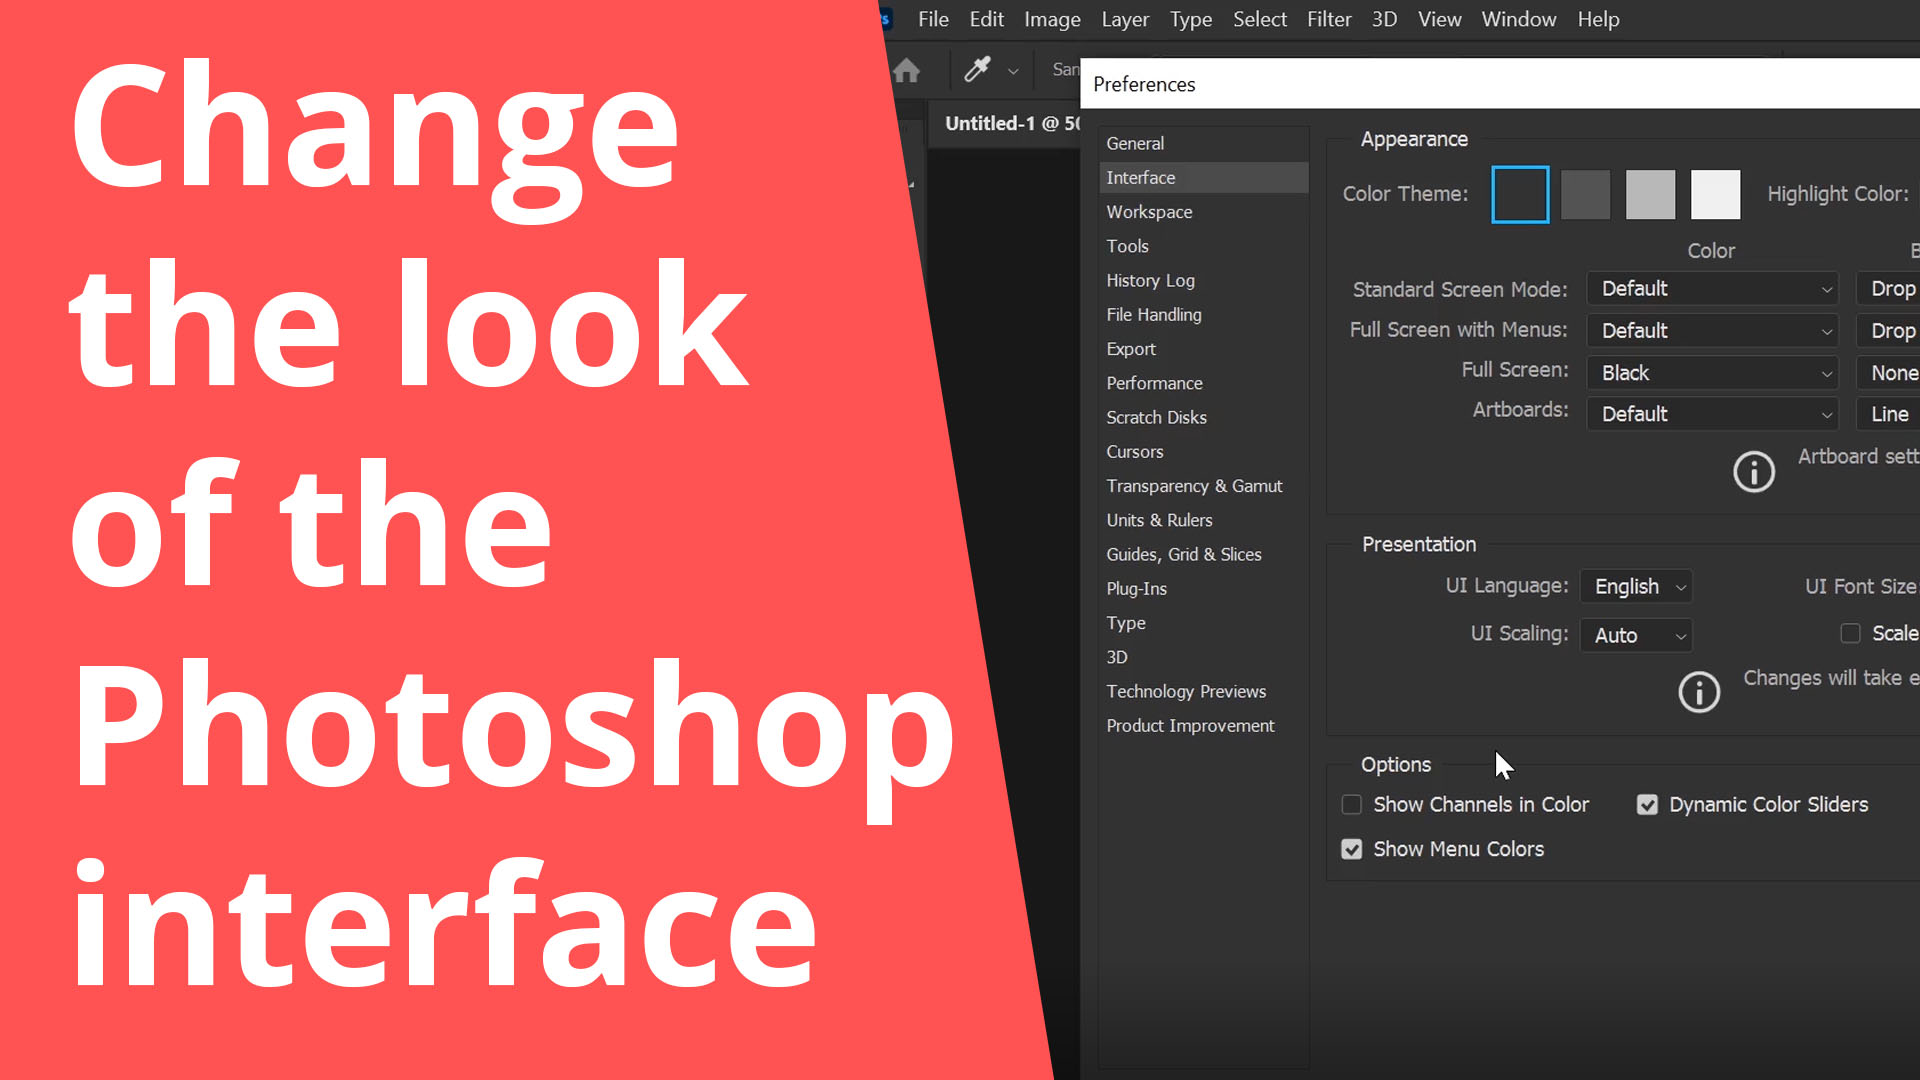 Change the look of the Photoshop interface